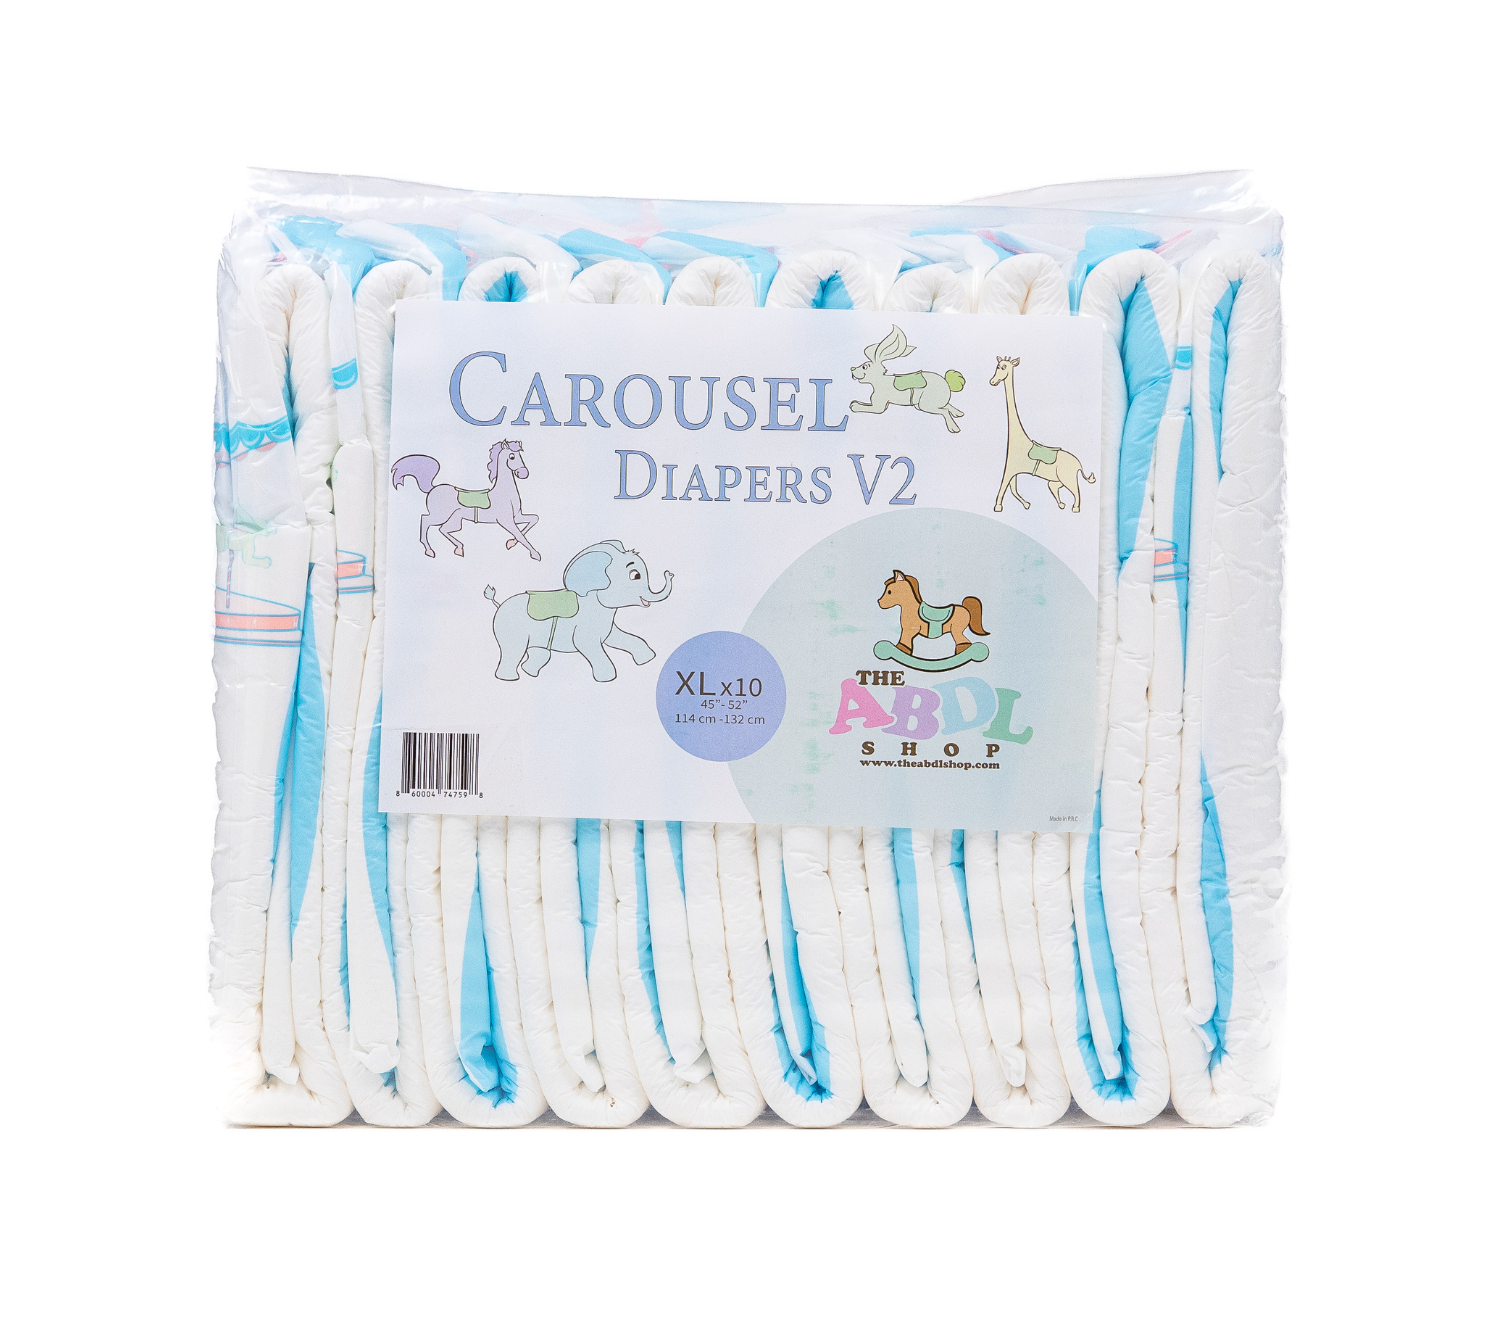 Carousel Diapers V2 - Adult Diapers for Men and Women, Day and Night  Diapers for Comfortable and Secure Fit with 2 Wide Tabs, Cute Pastel Color